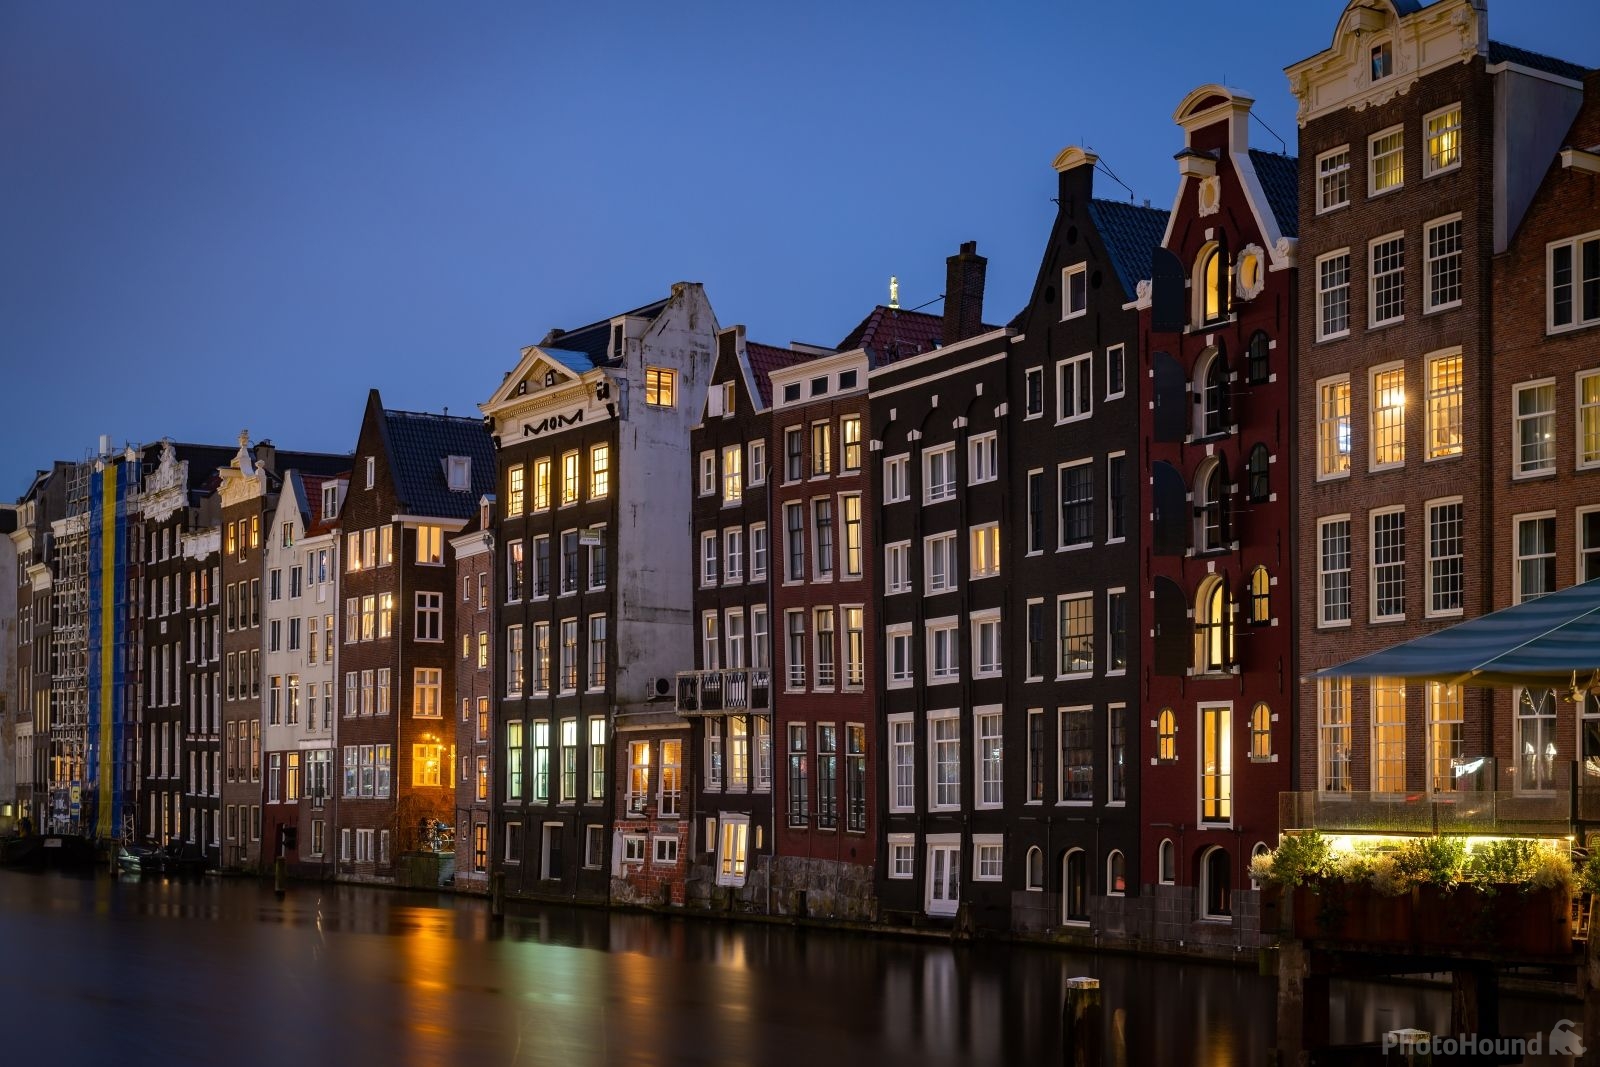 Image of Houses in the Damrak, Amsterdam by VOJTa Herout